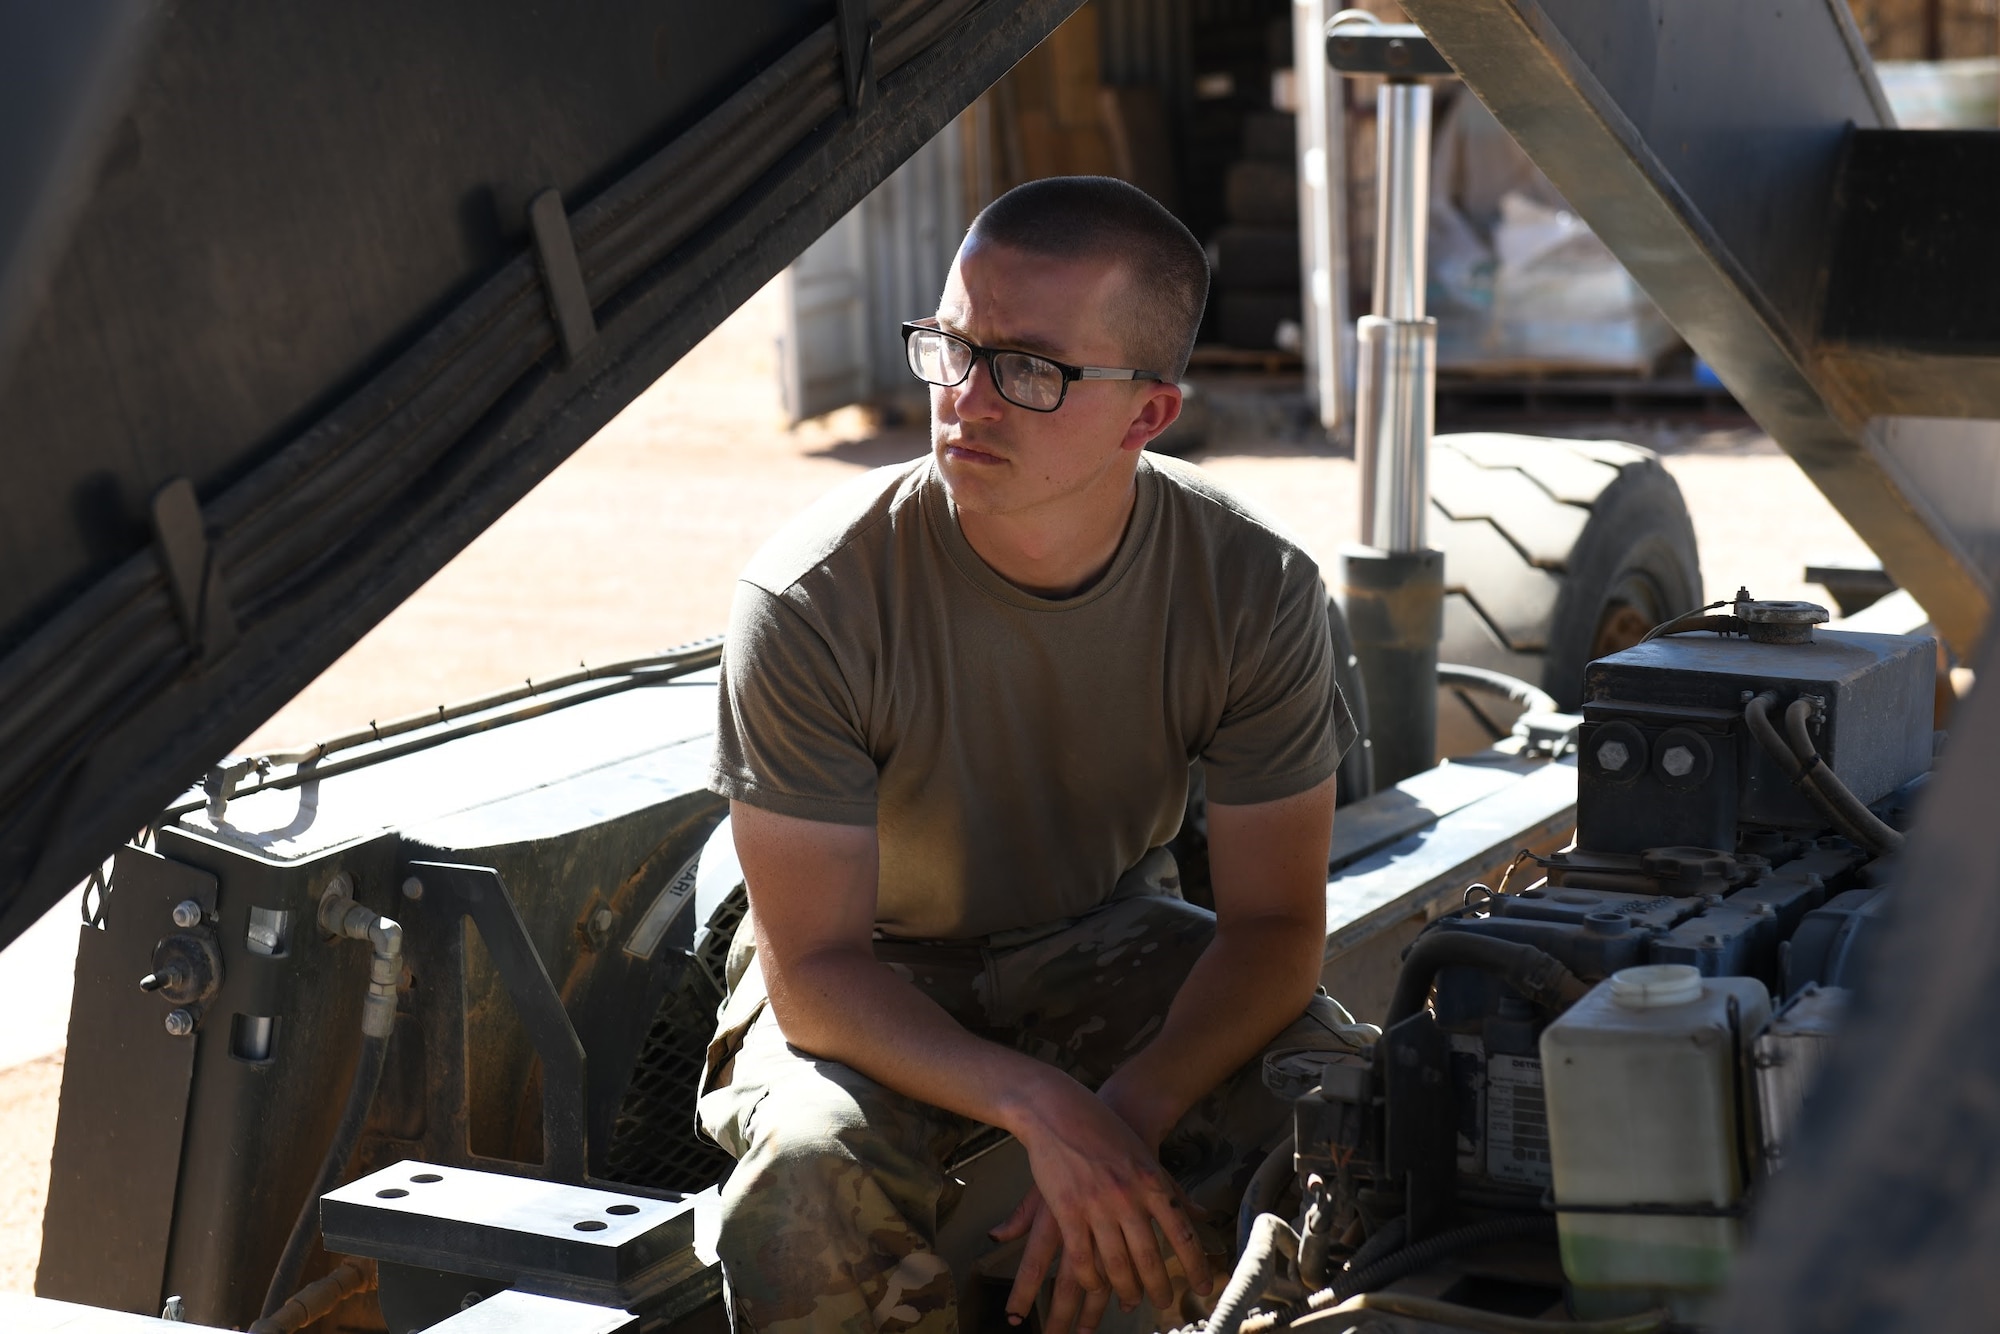 U.S. Air Force Senior Airman Ryan Davis, 724th Expeditionary Air Base Squadron air terminal operations center journeyman, cools off from the desert heat while servicing a Halvorsen 25K-Loader, at Nigerien Air Base 201, Agadez, Niger, Jan 4, 2021. ATOC’s main purpose at AB 201 is to move cargo, mail and passengers in and out of the installation ensuring cargo gets into the hands of the users and passengers get to where they need to go. (U.S. Air Force photo by Senior Airman Gabrielle Winn)